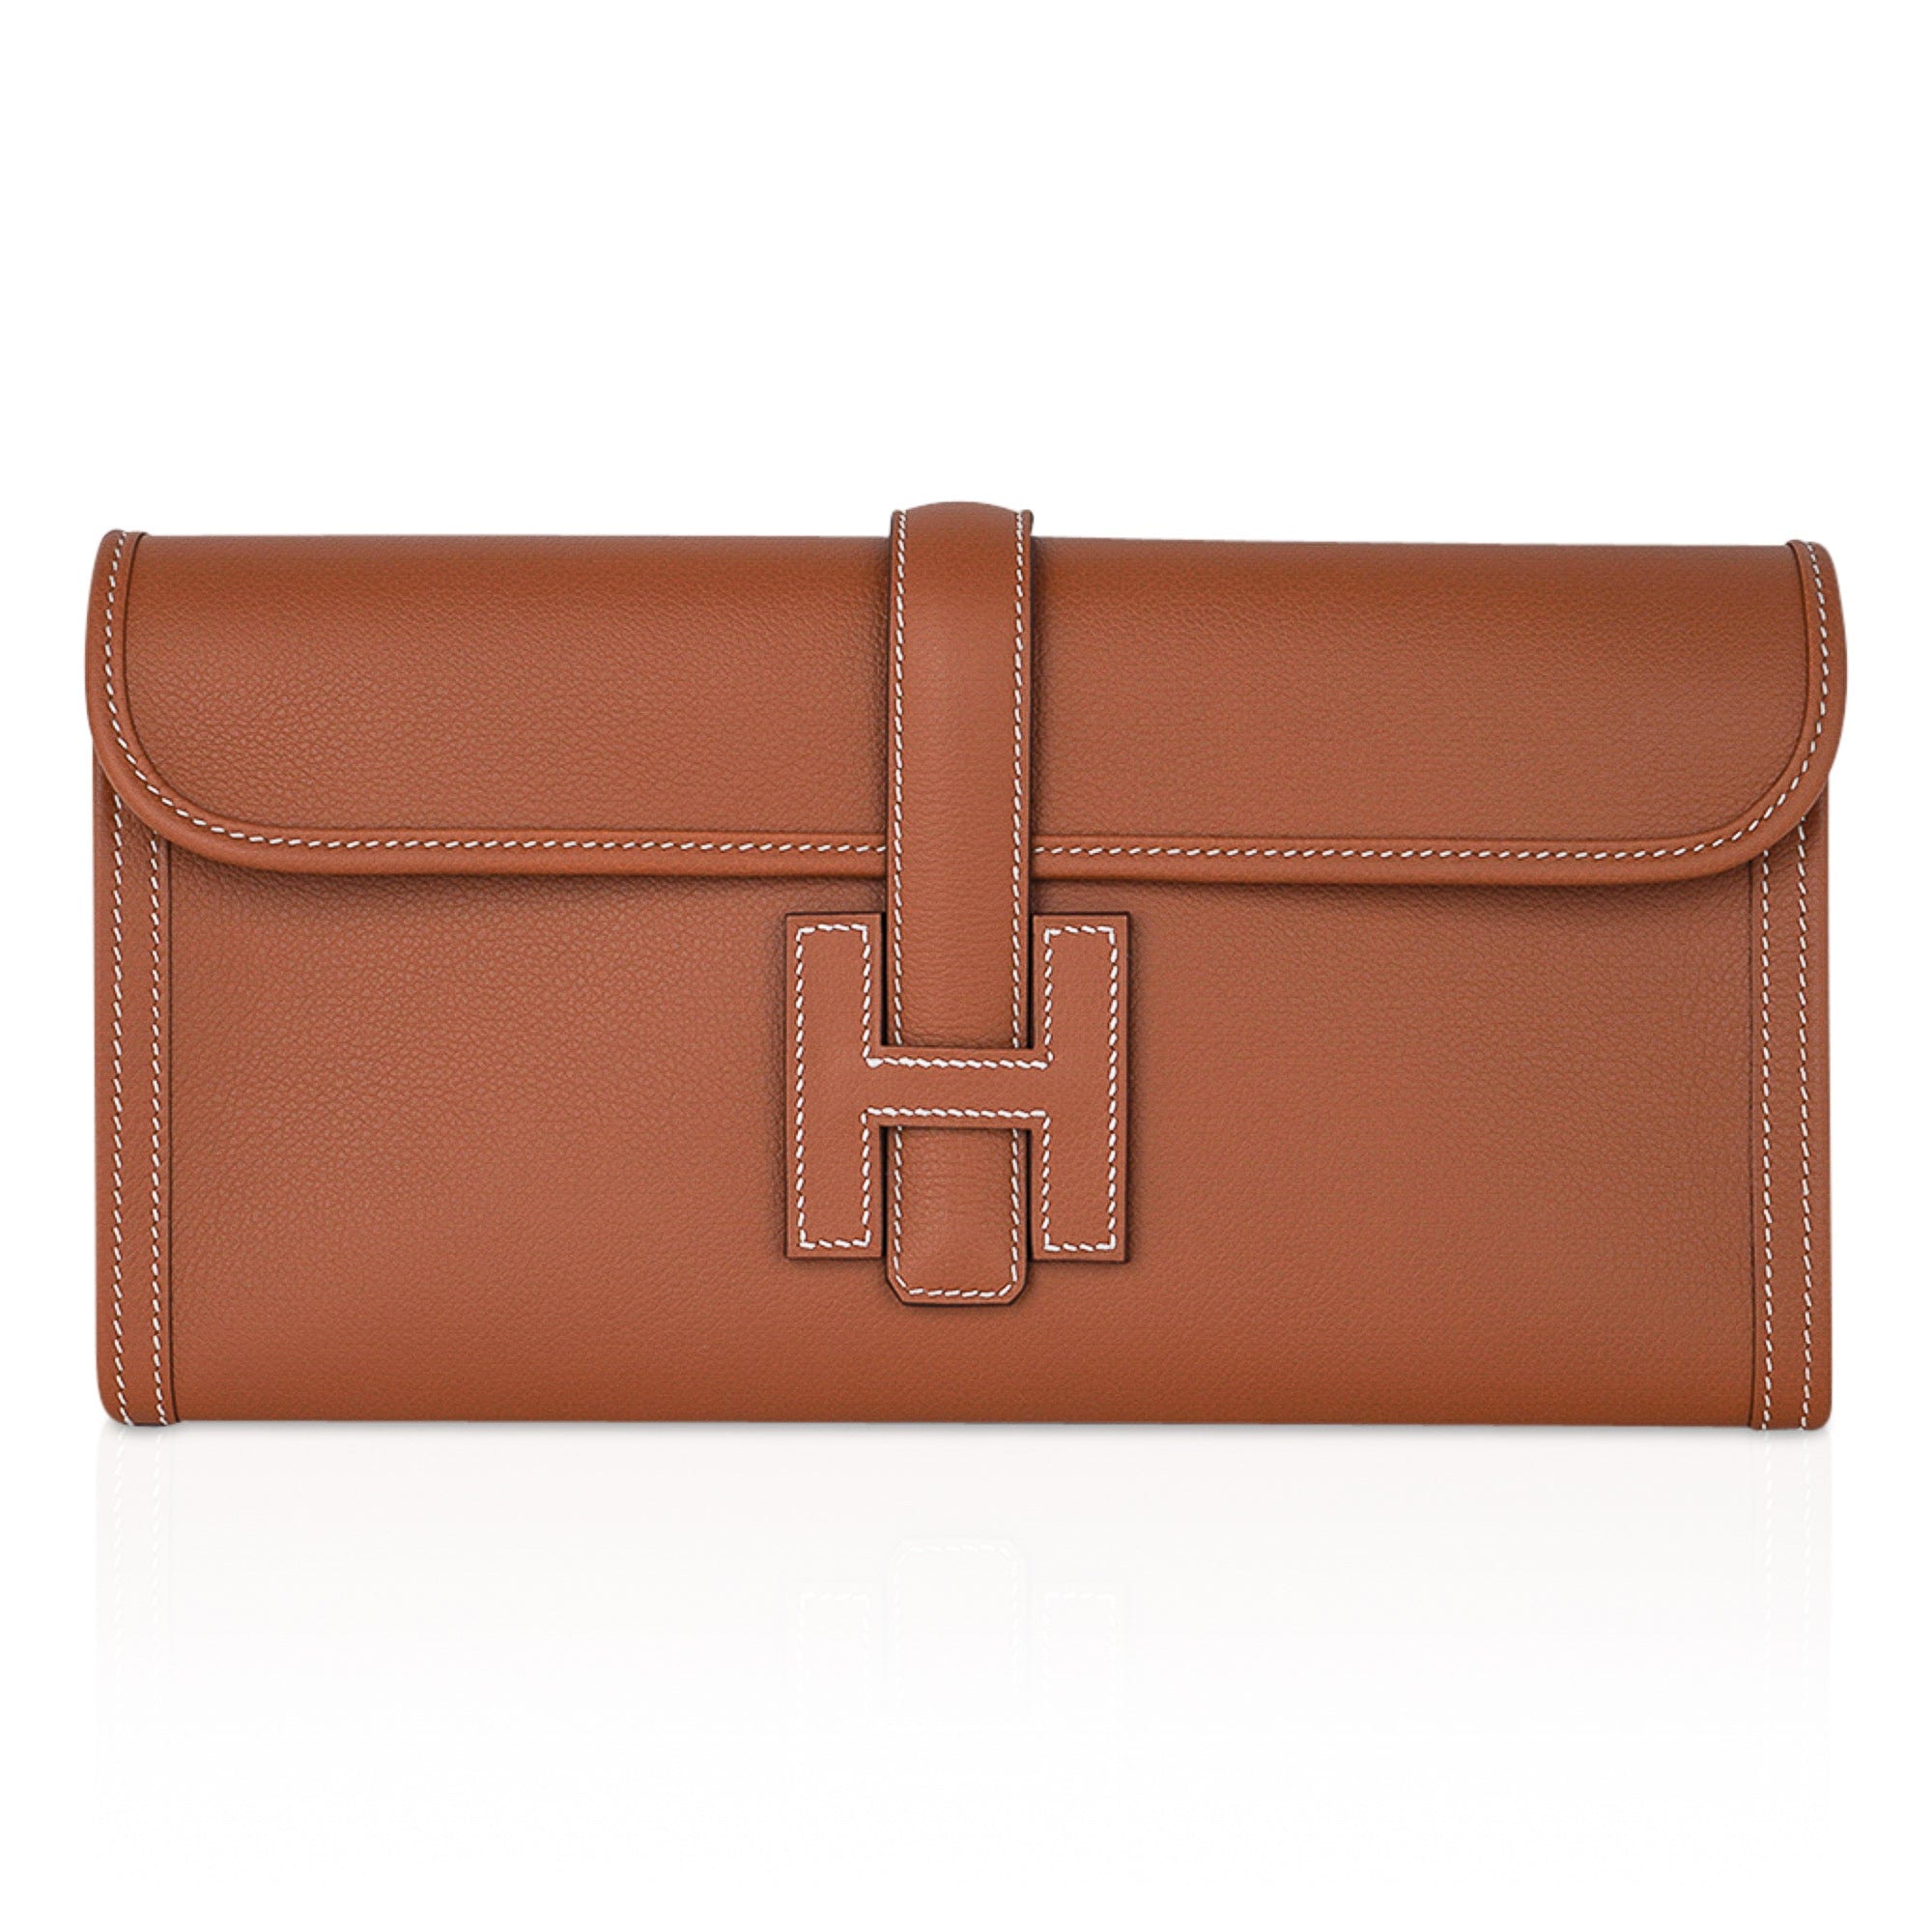 Hermes Jige Elan 29 Gold Clutch Bag Evercolor Leather – Mightychic